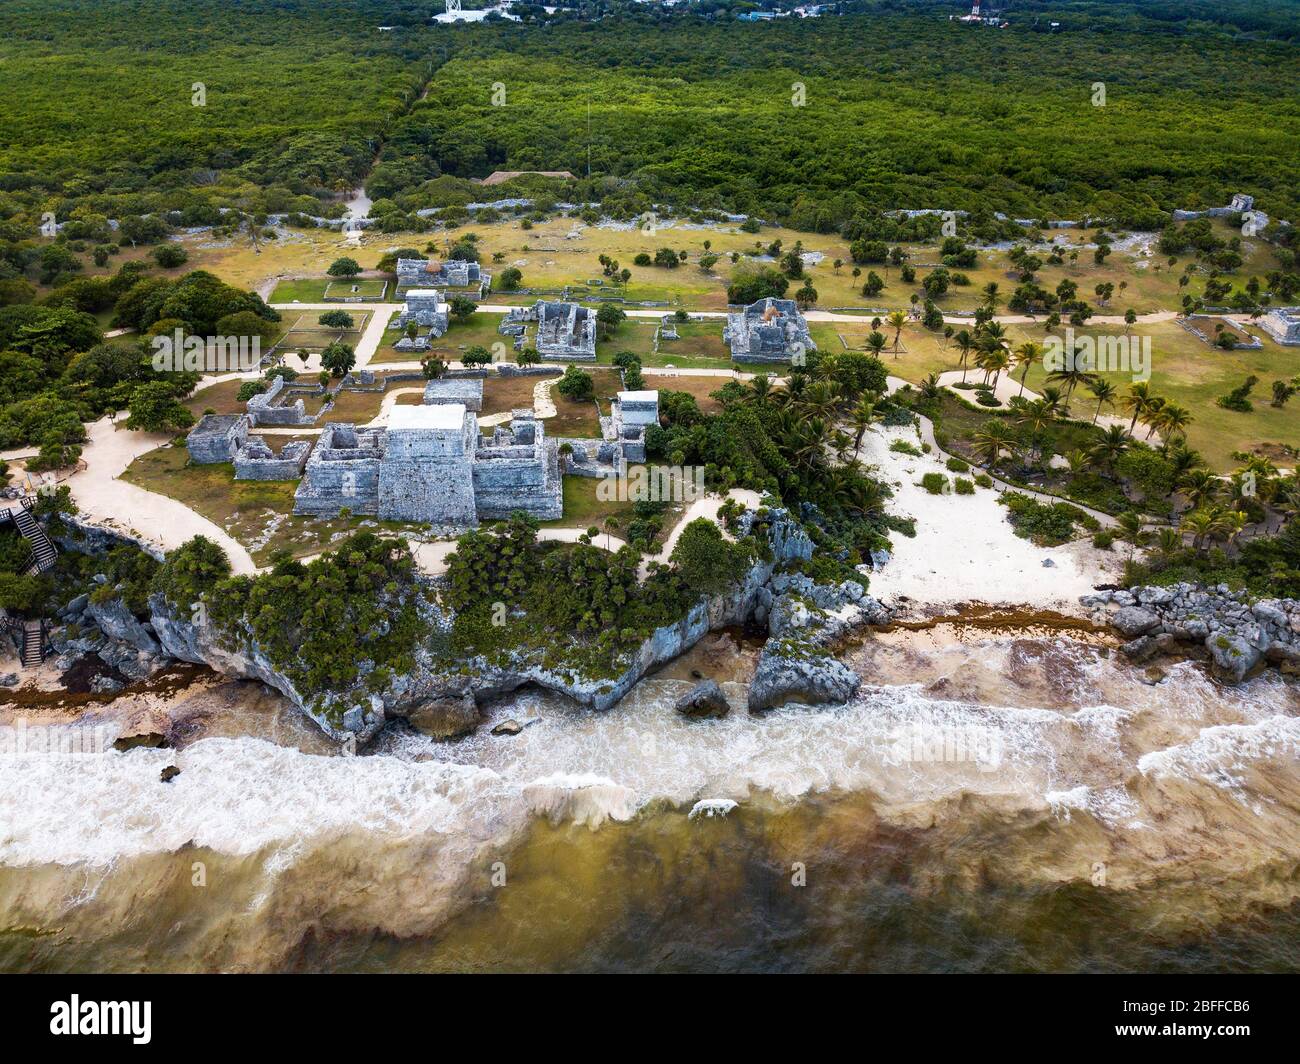 Aerial views of El Castillo and the Ruins of the Mayan temple grounds at Tulum, Quintana Roo, Yucatan, Mexico. Tulum is the site of a pre-Columbian Ma Stock Photo